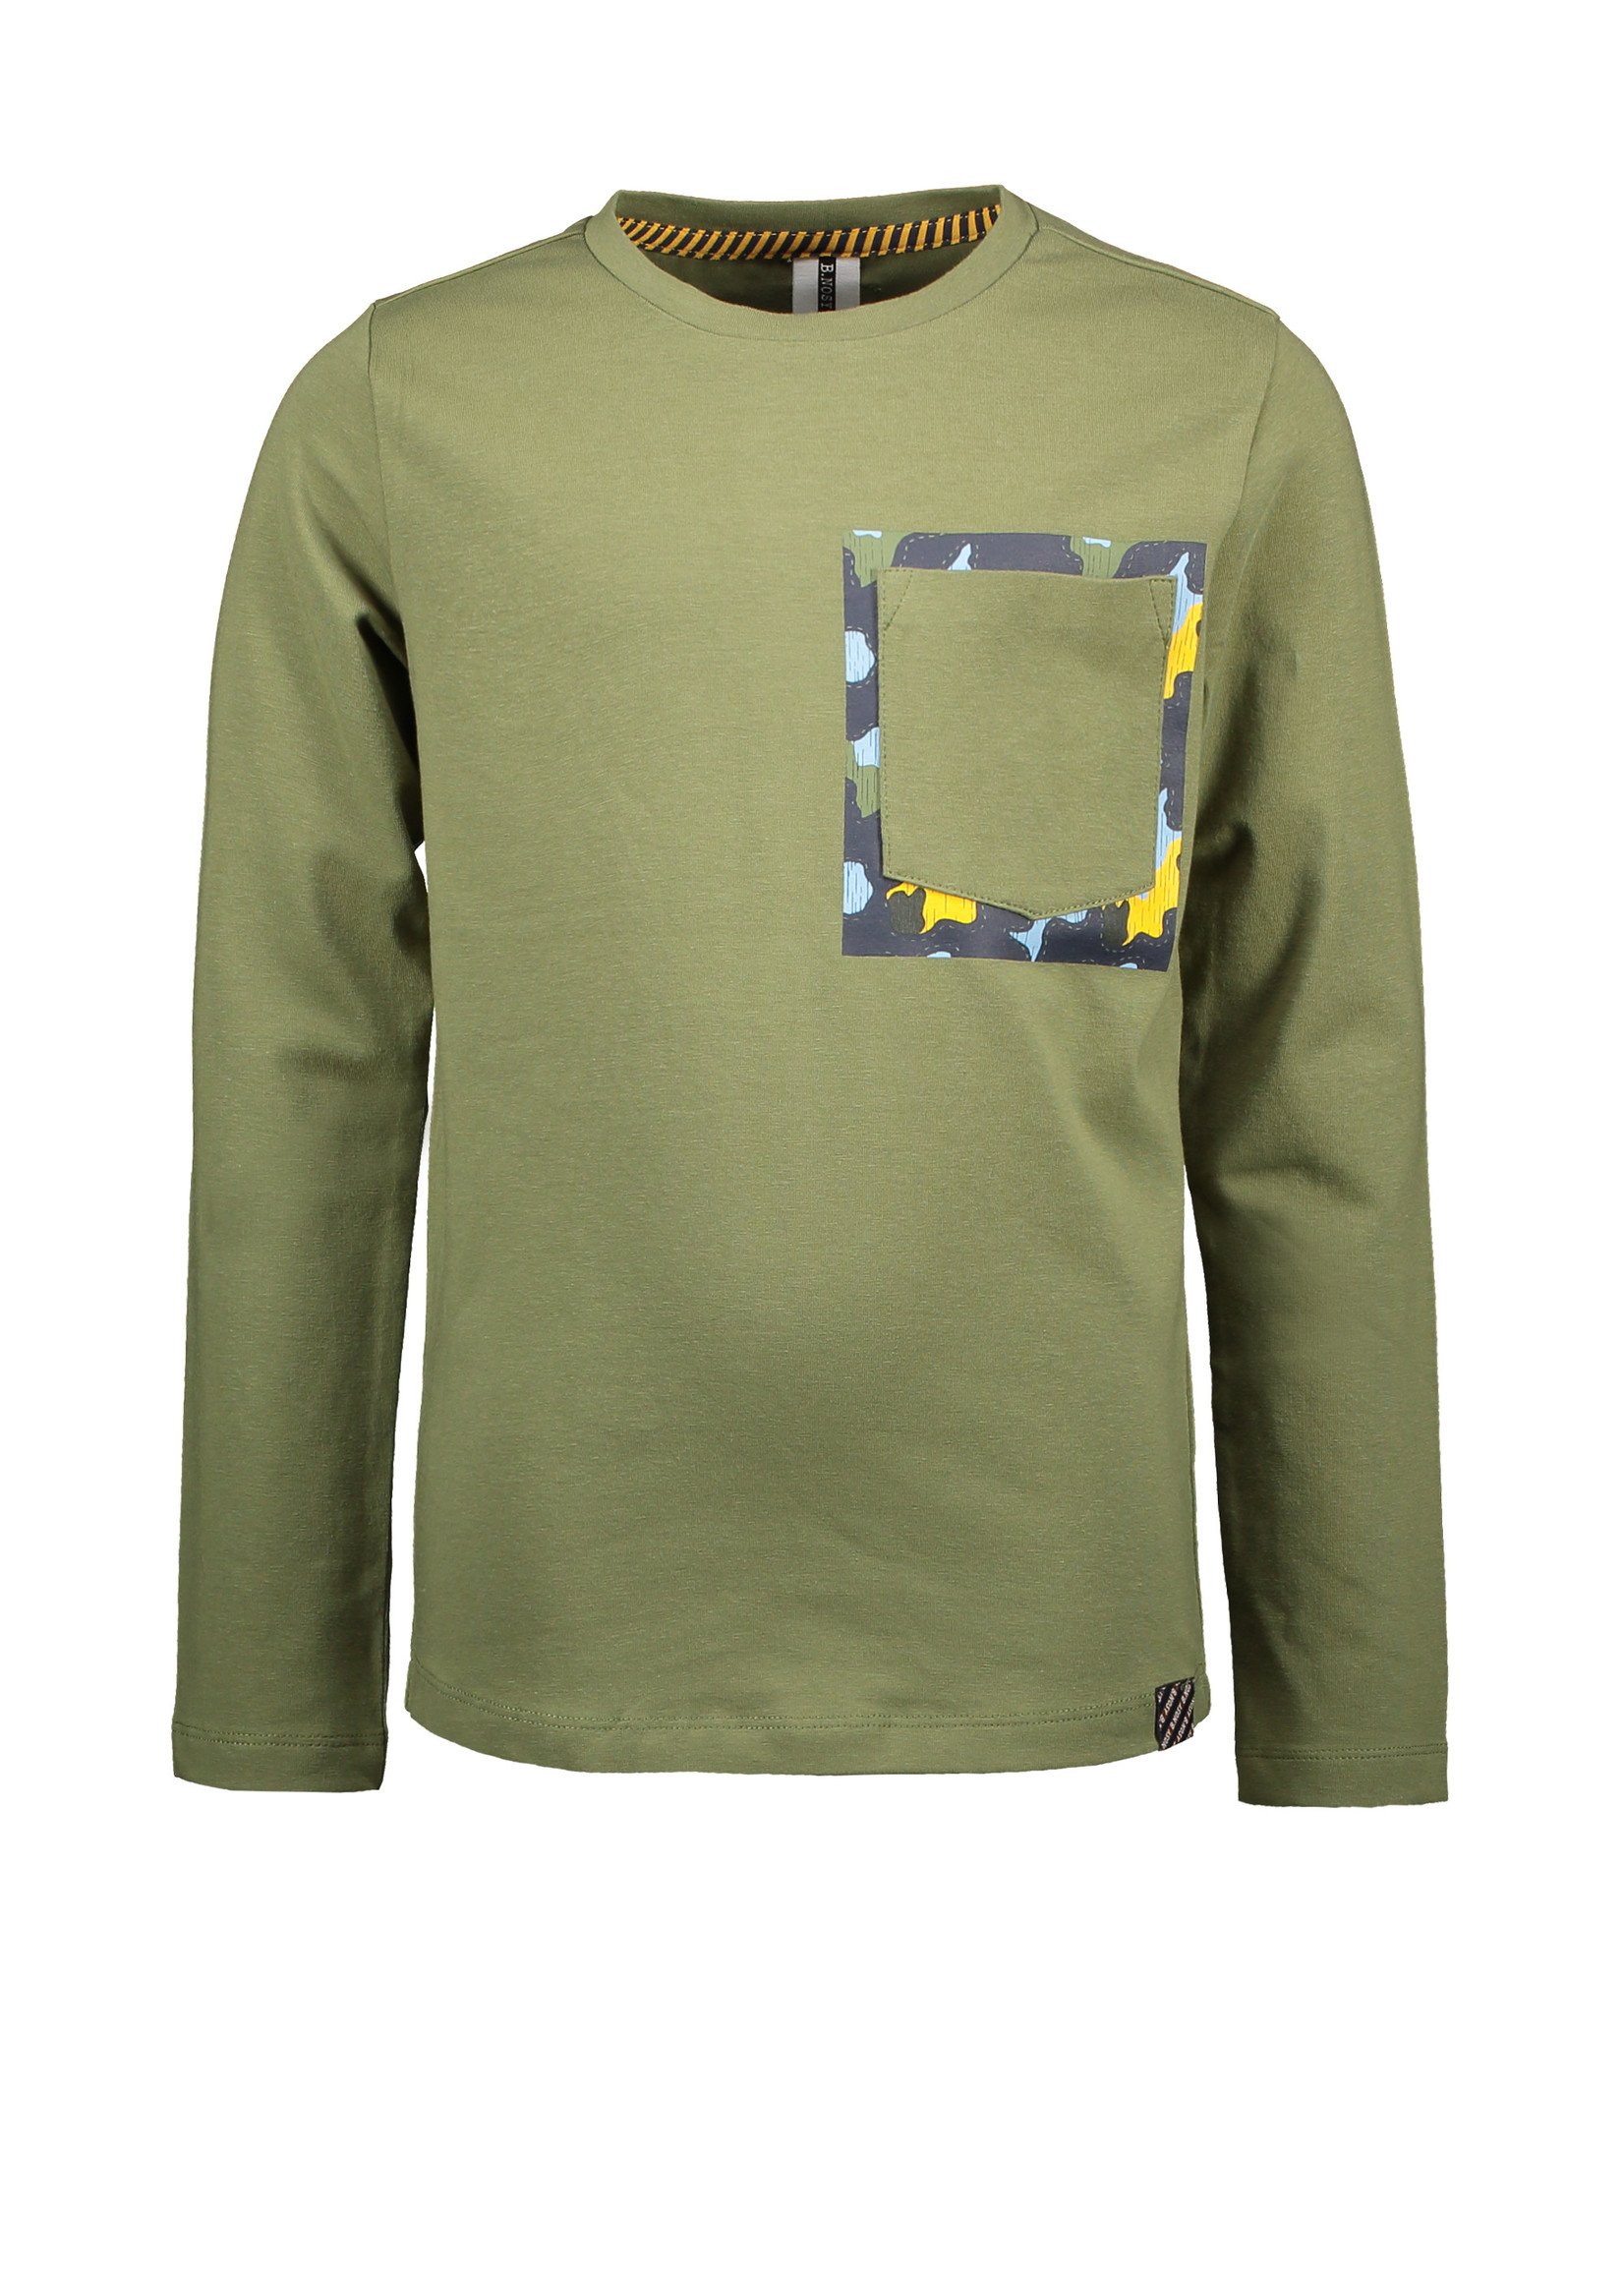 B-Nosy Boys t-shirt with print behind patched pocket, warrior green